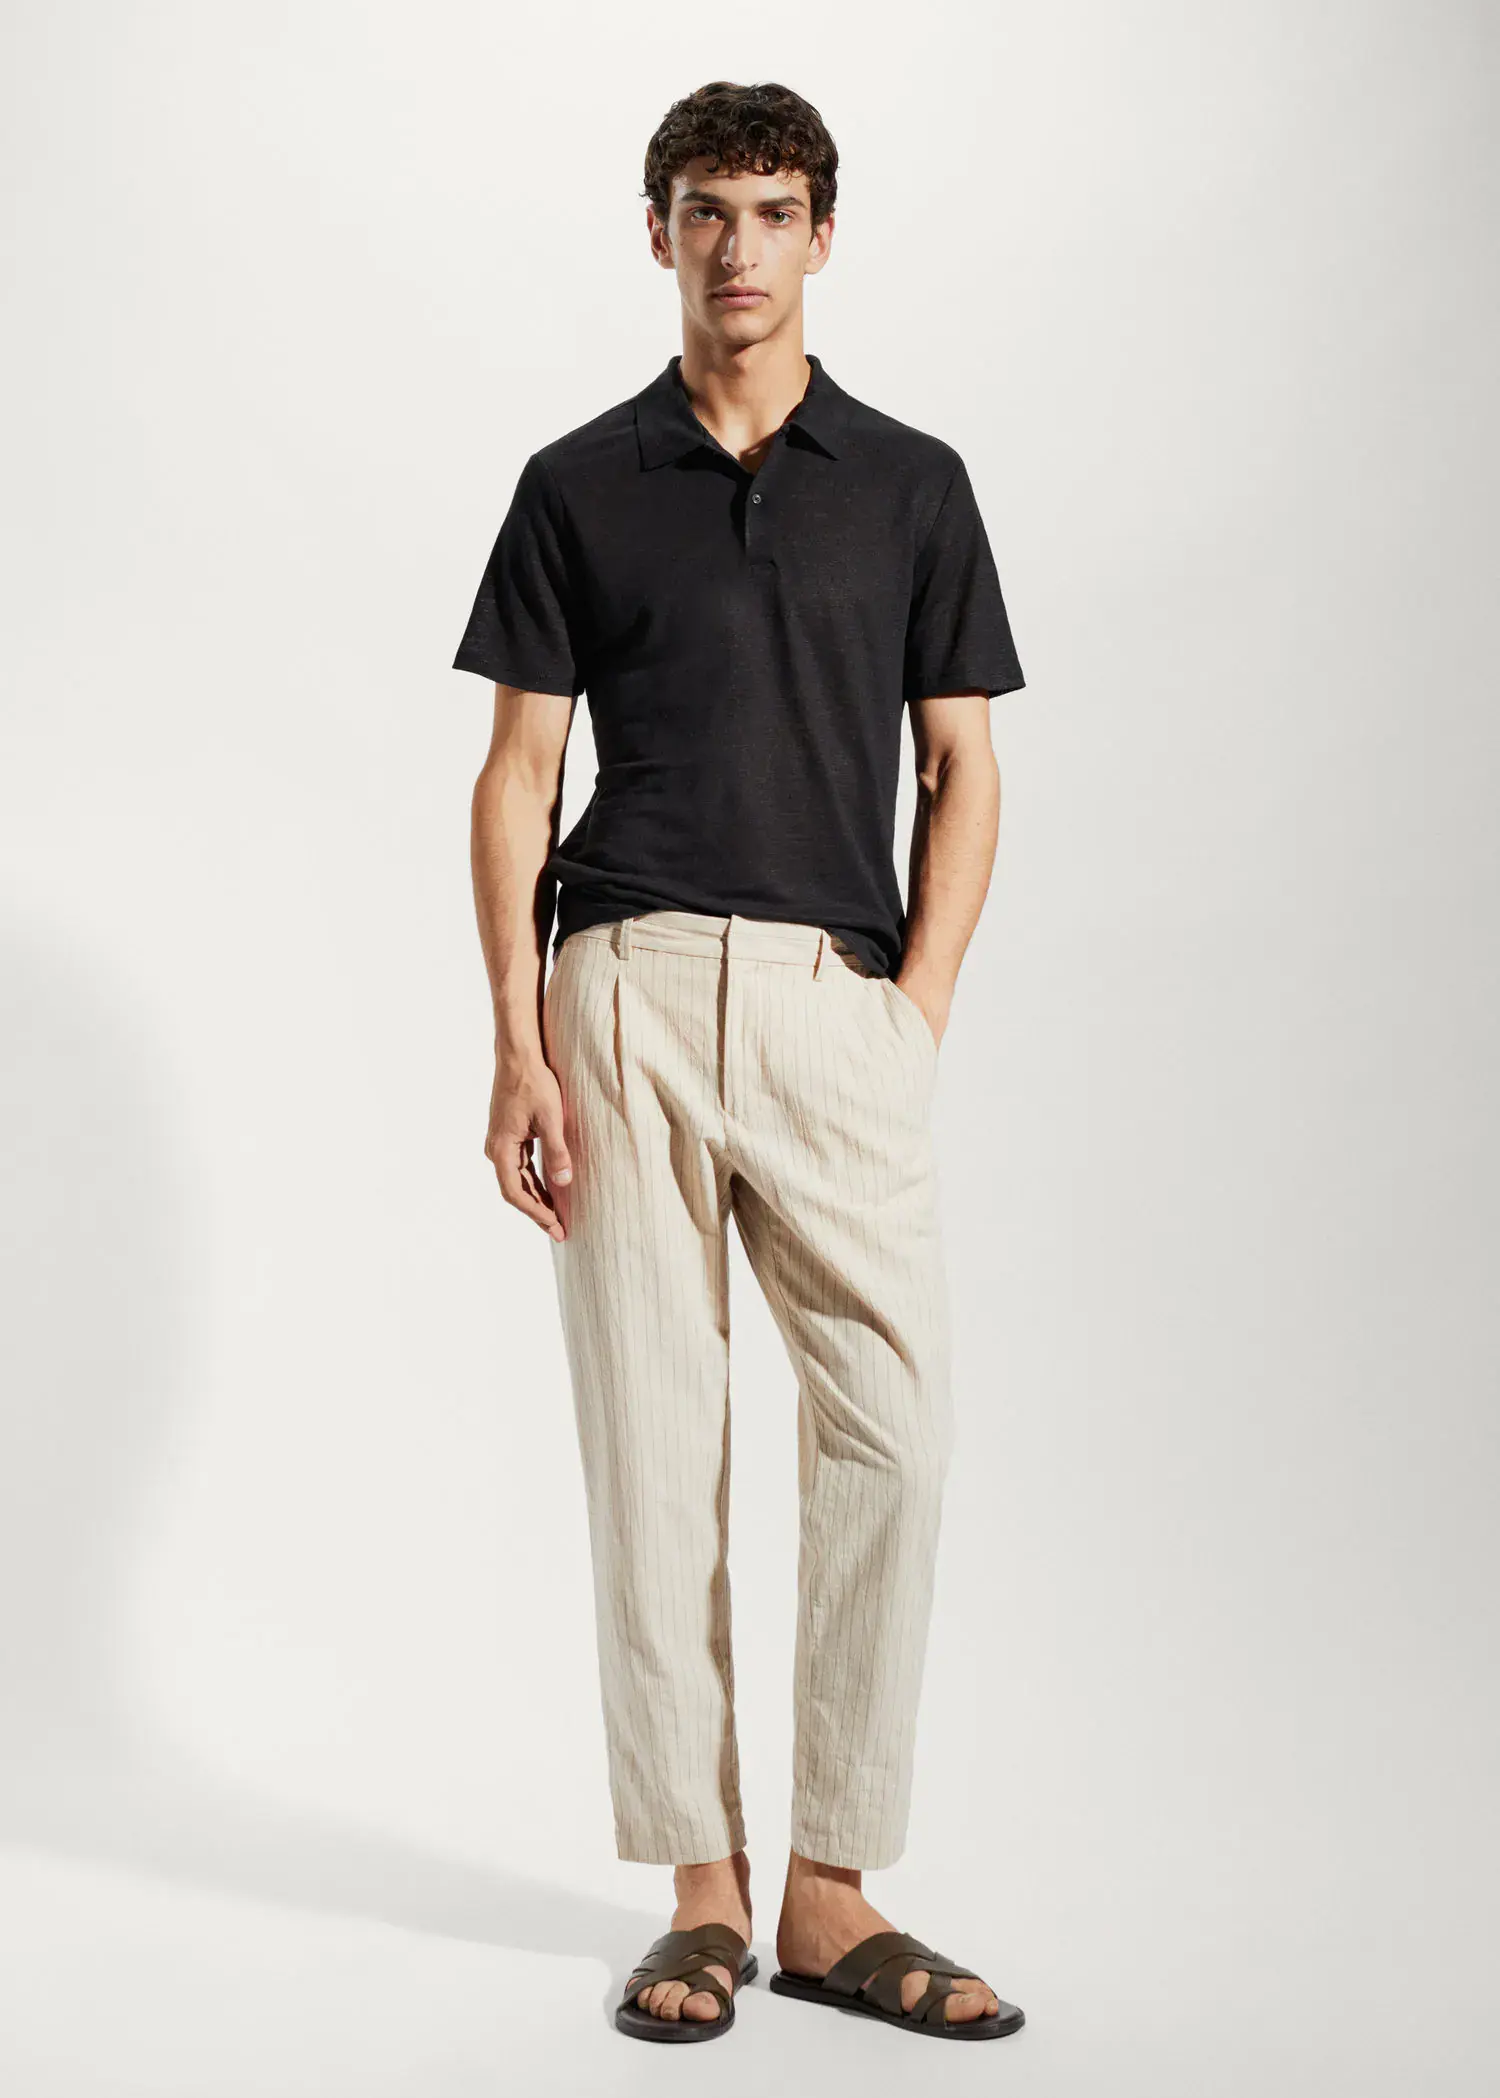 Mango Slim fit 100% linen polo shirt. a man in a black shirt and beige pants. 